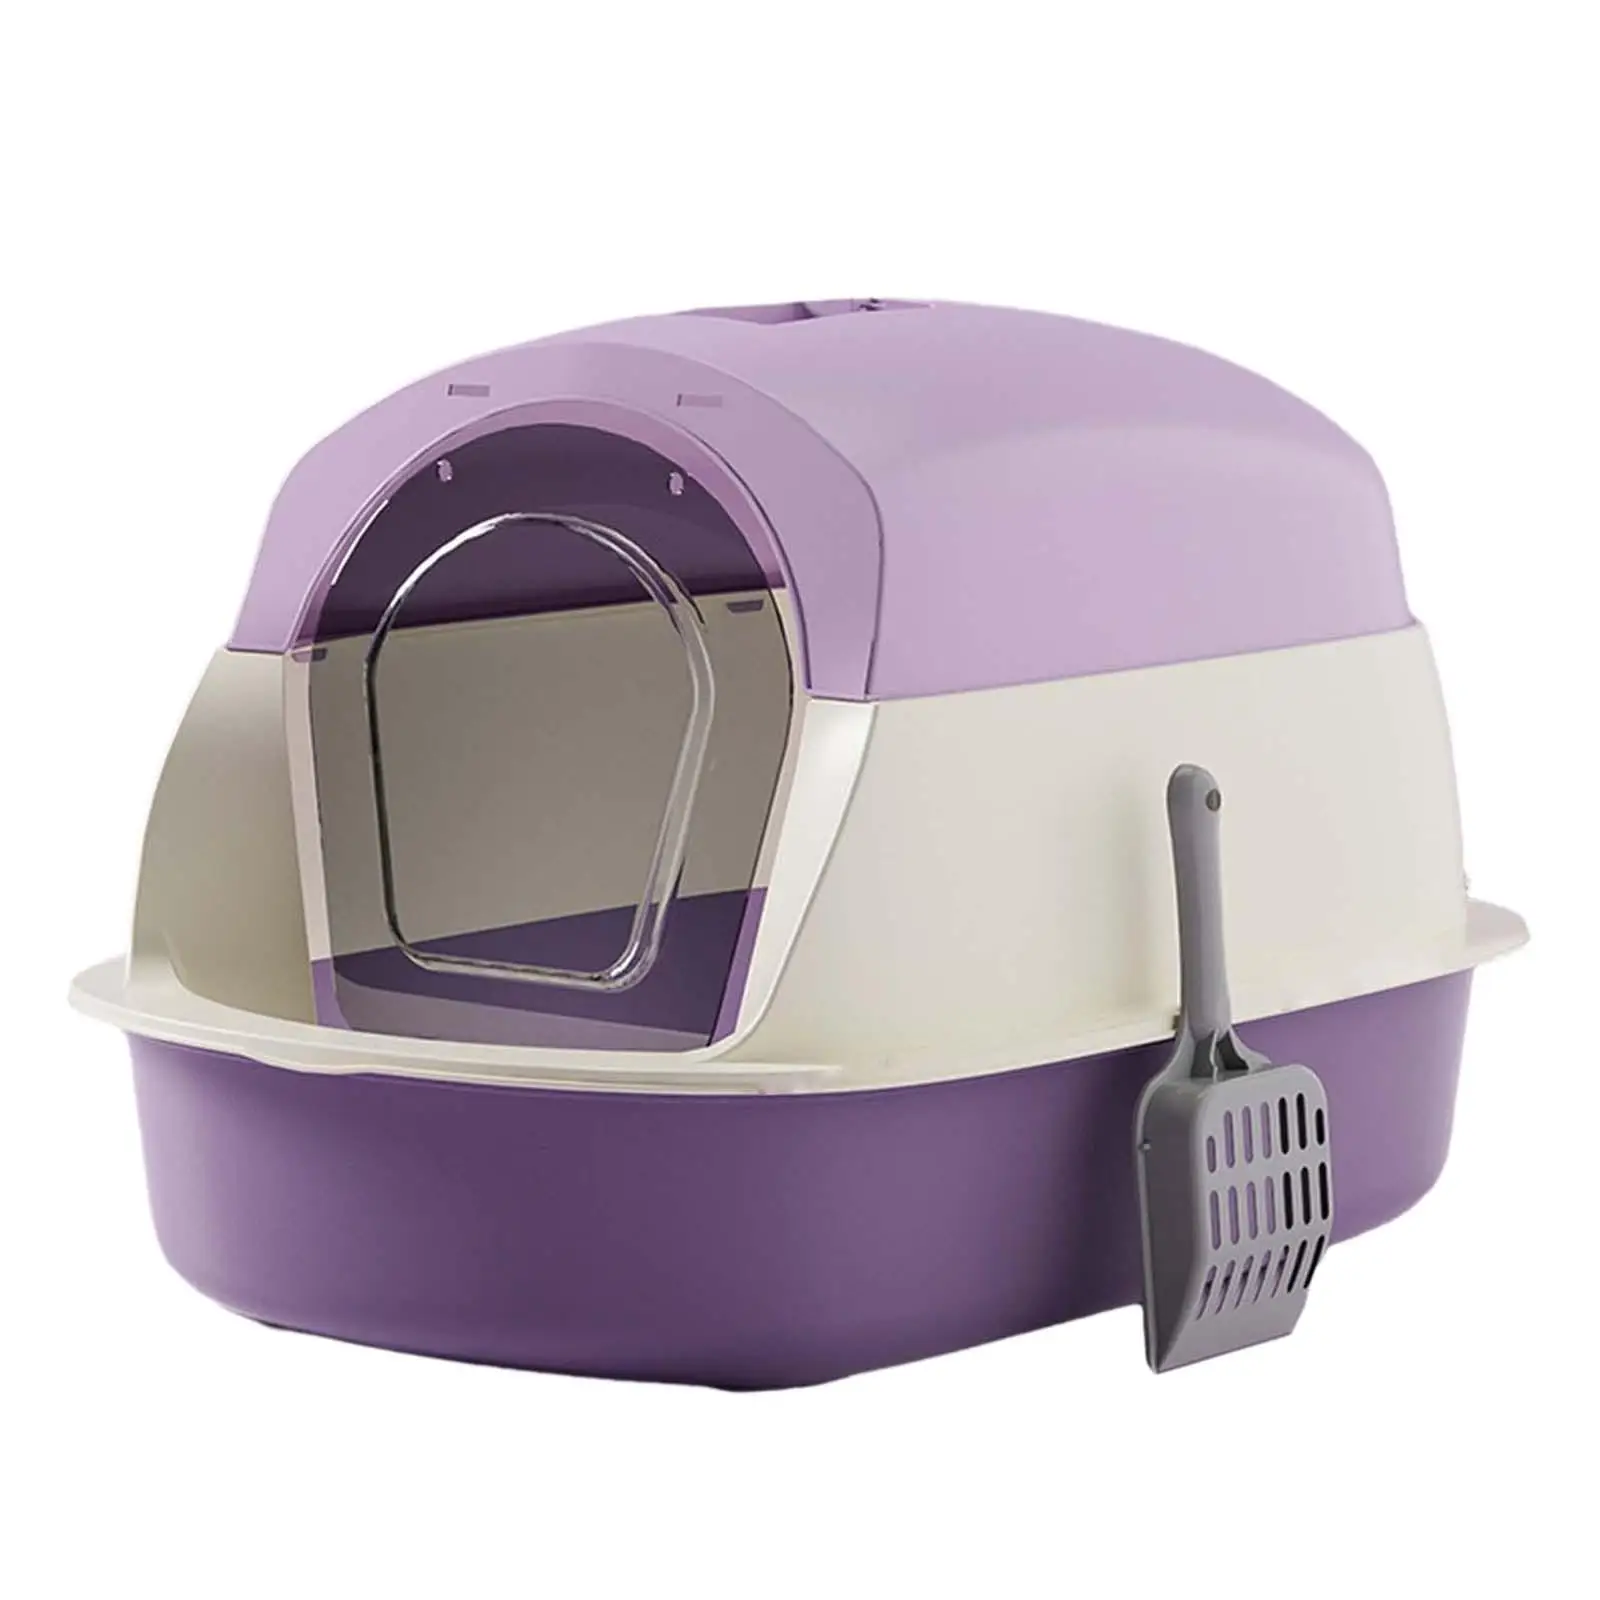 Large Cat Litter Box Easy Easy to Clean Hooded Cat Litter Box with Lid